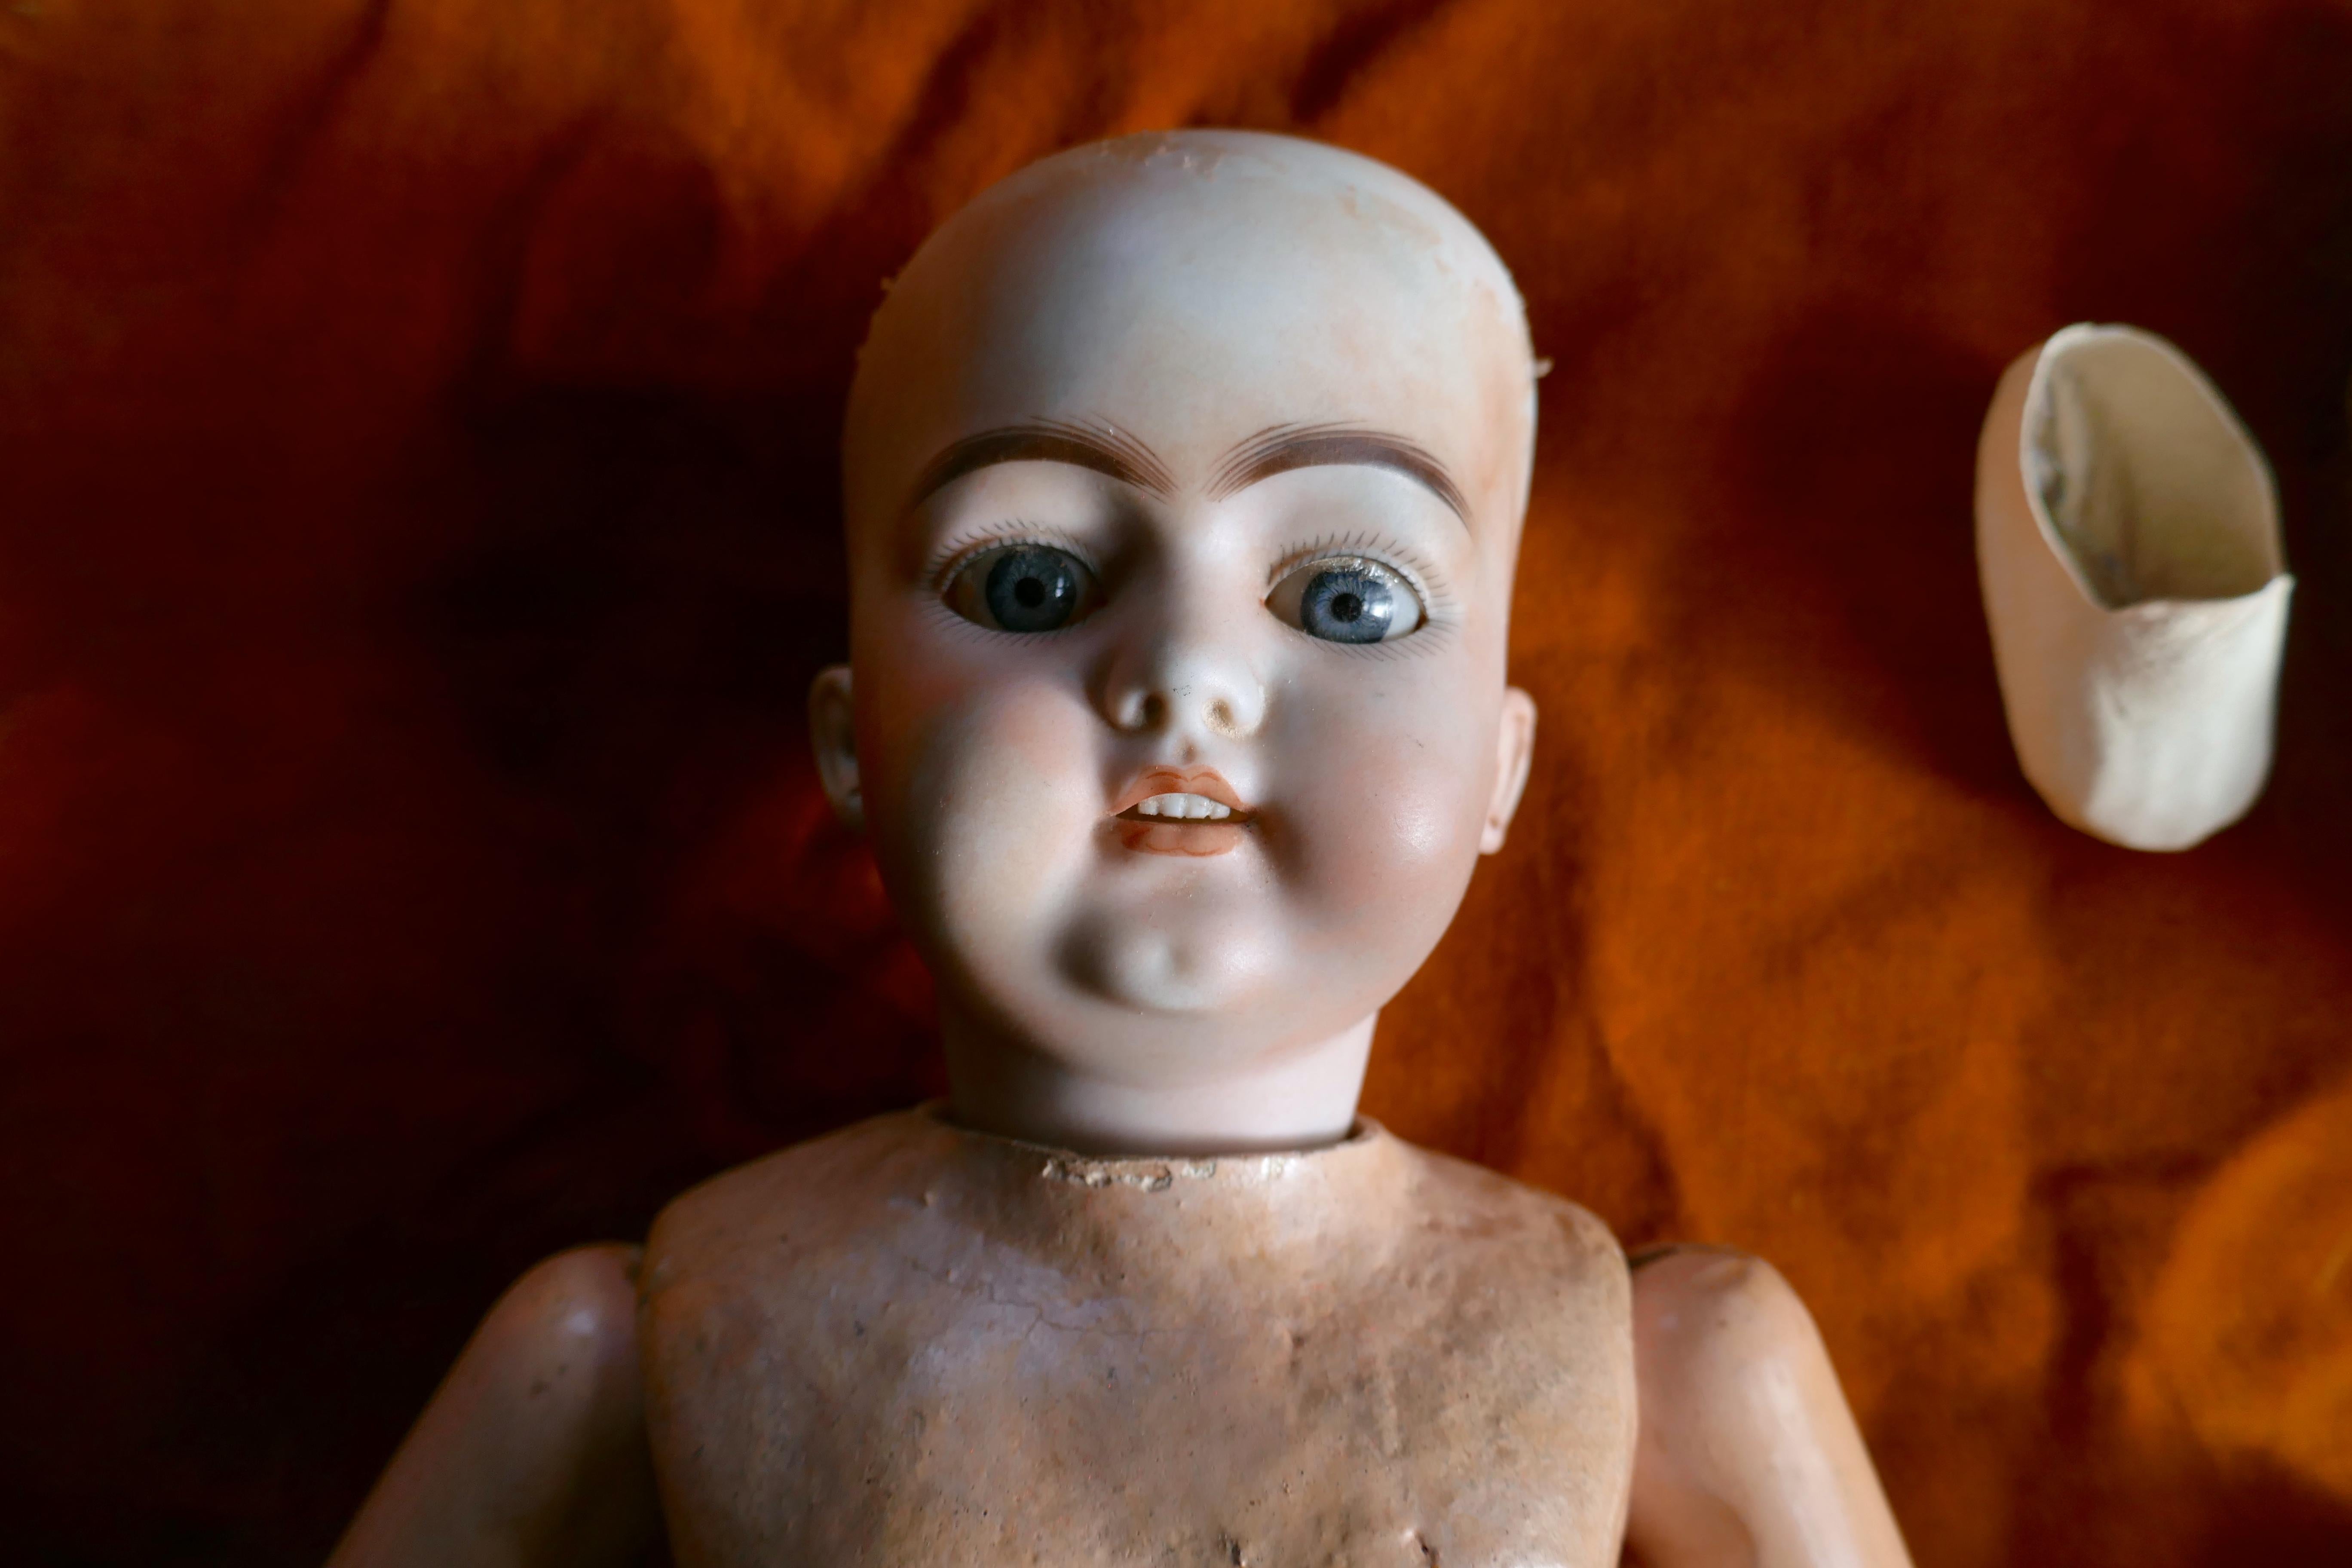 19th century character doll possibly by Kestner with wig and clothes.


The porcelain head has JH 1019 DLP, 7, Germany, on the back, she has glass eyes in pale blue/grey, teeth with a dimple on her chin and pierced ears.
The body is made in